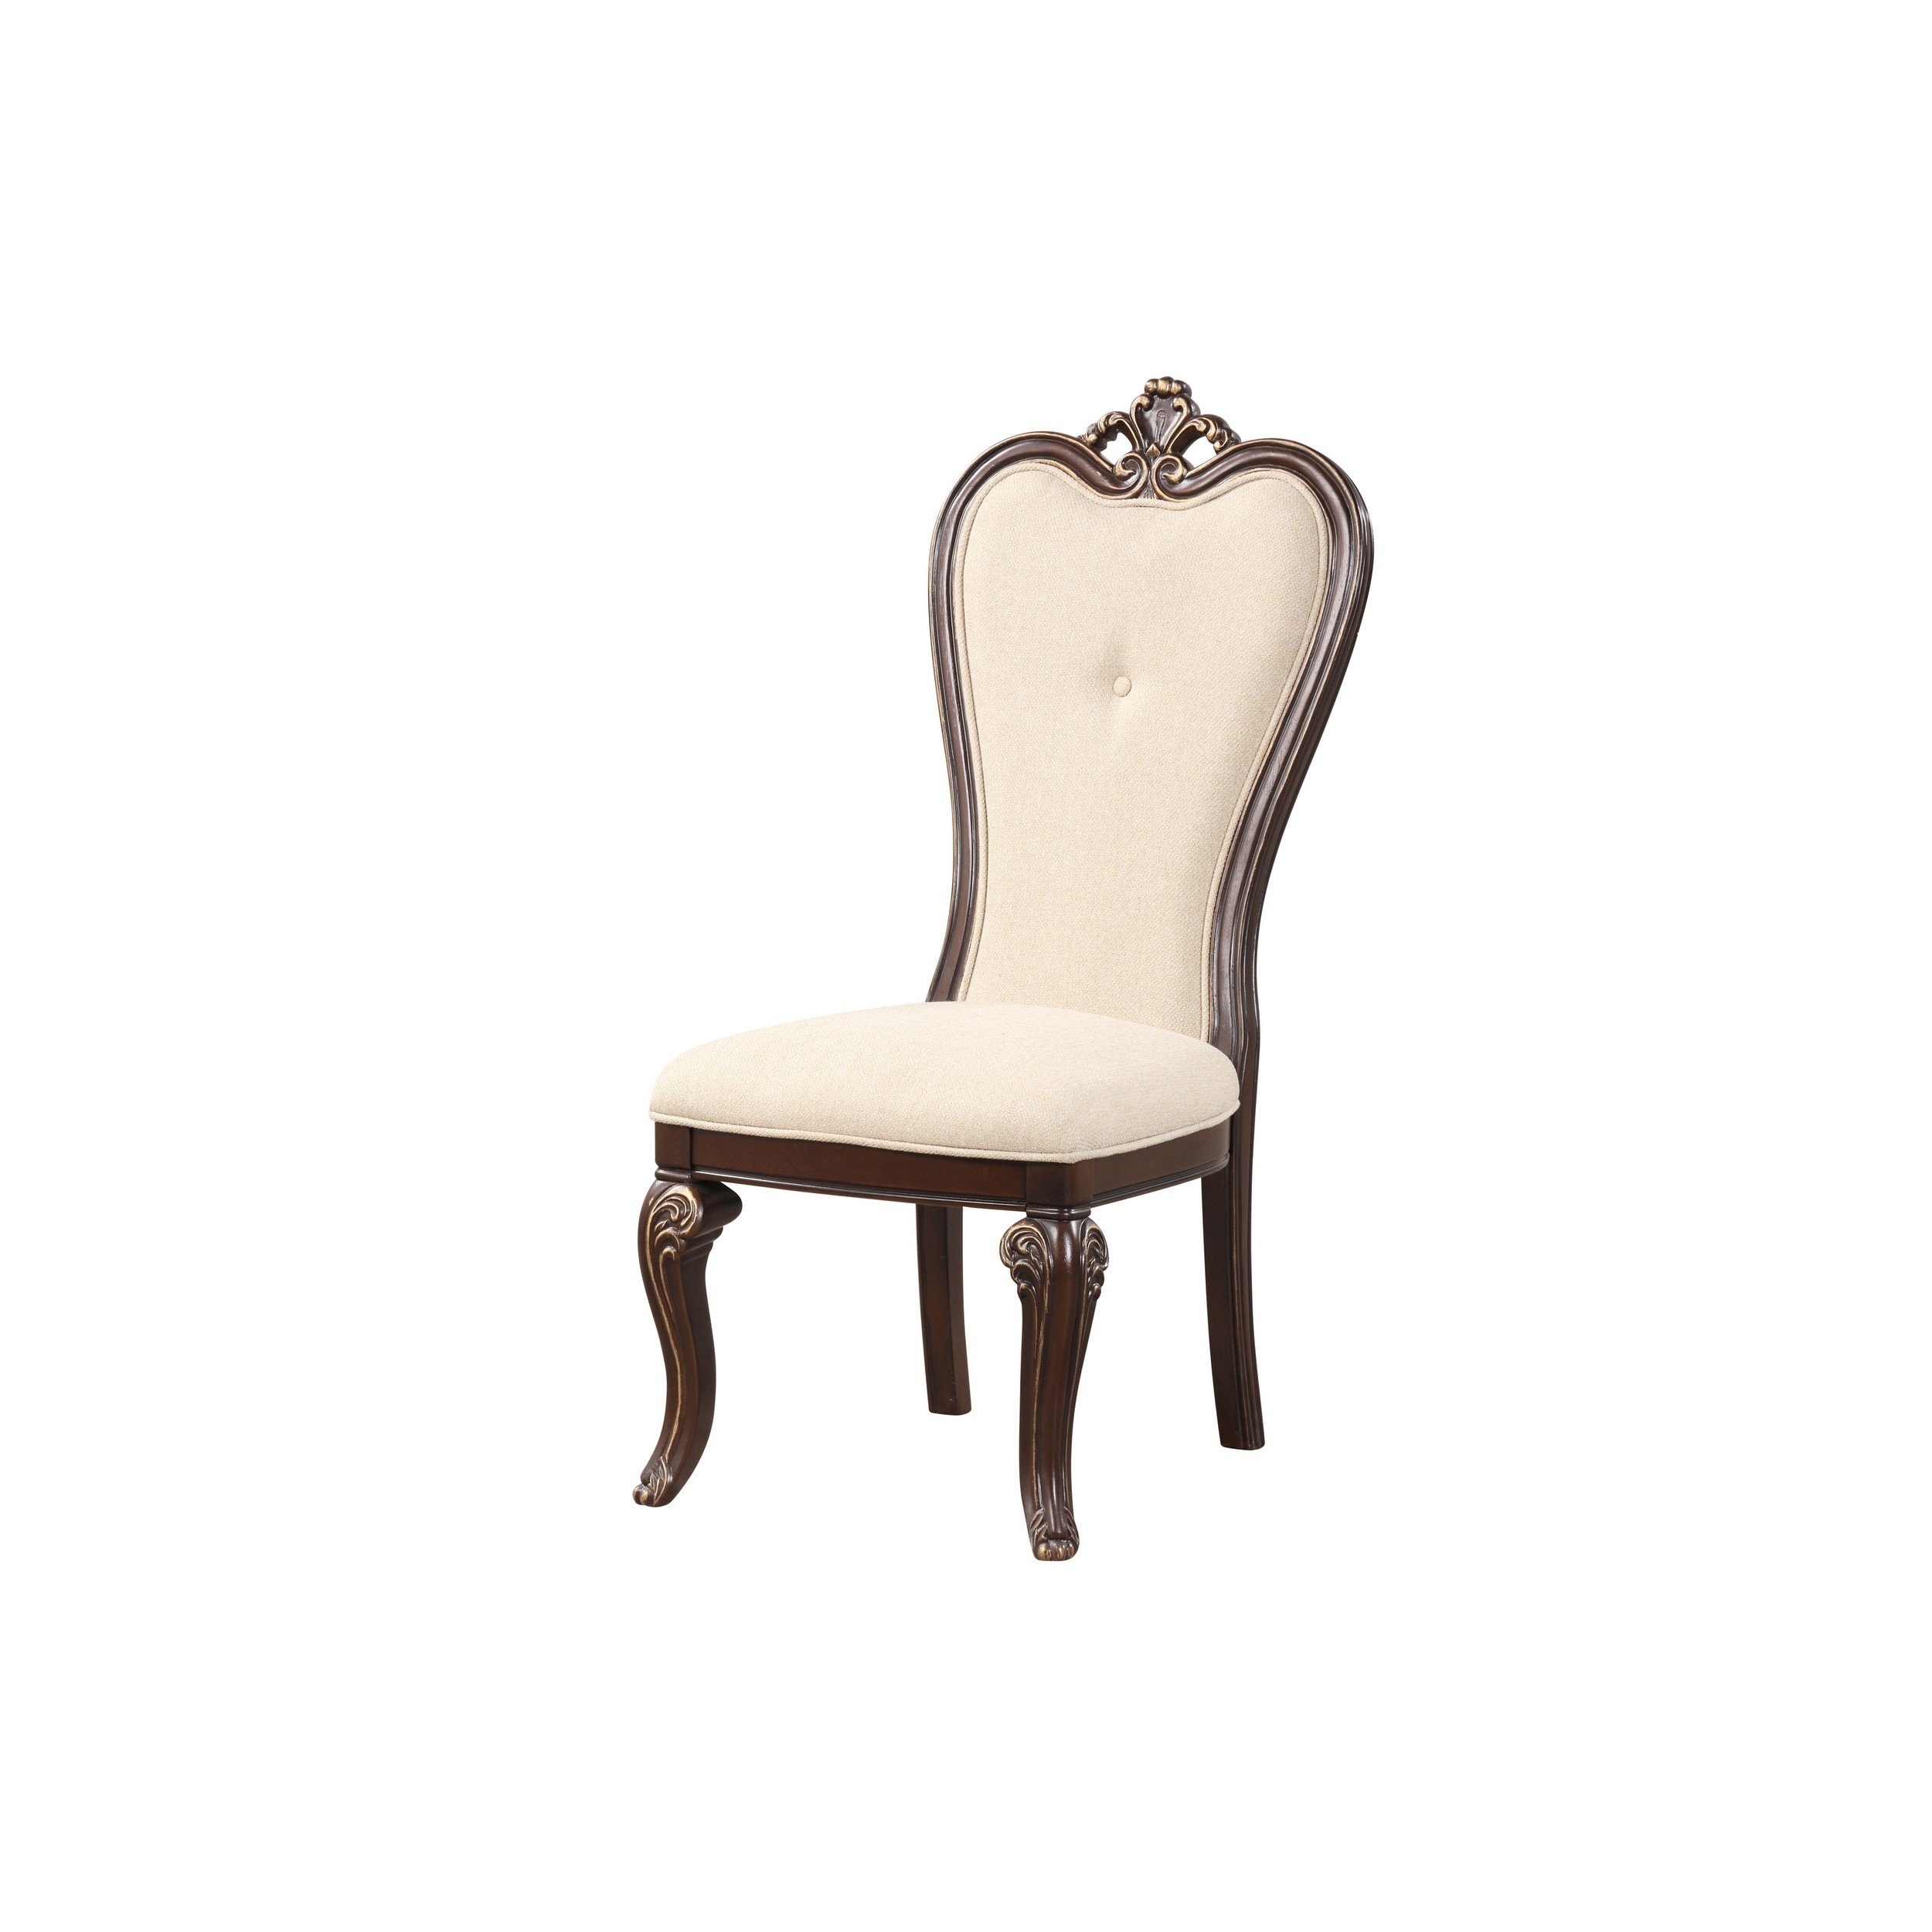 Mike 20 Inch Set Of 2 Dining Chairs, Crown Top, Beige Fabric Brown Wood - Saltoro Sherpi